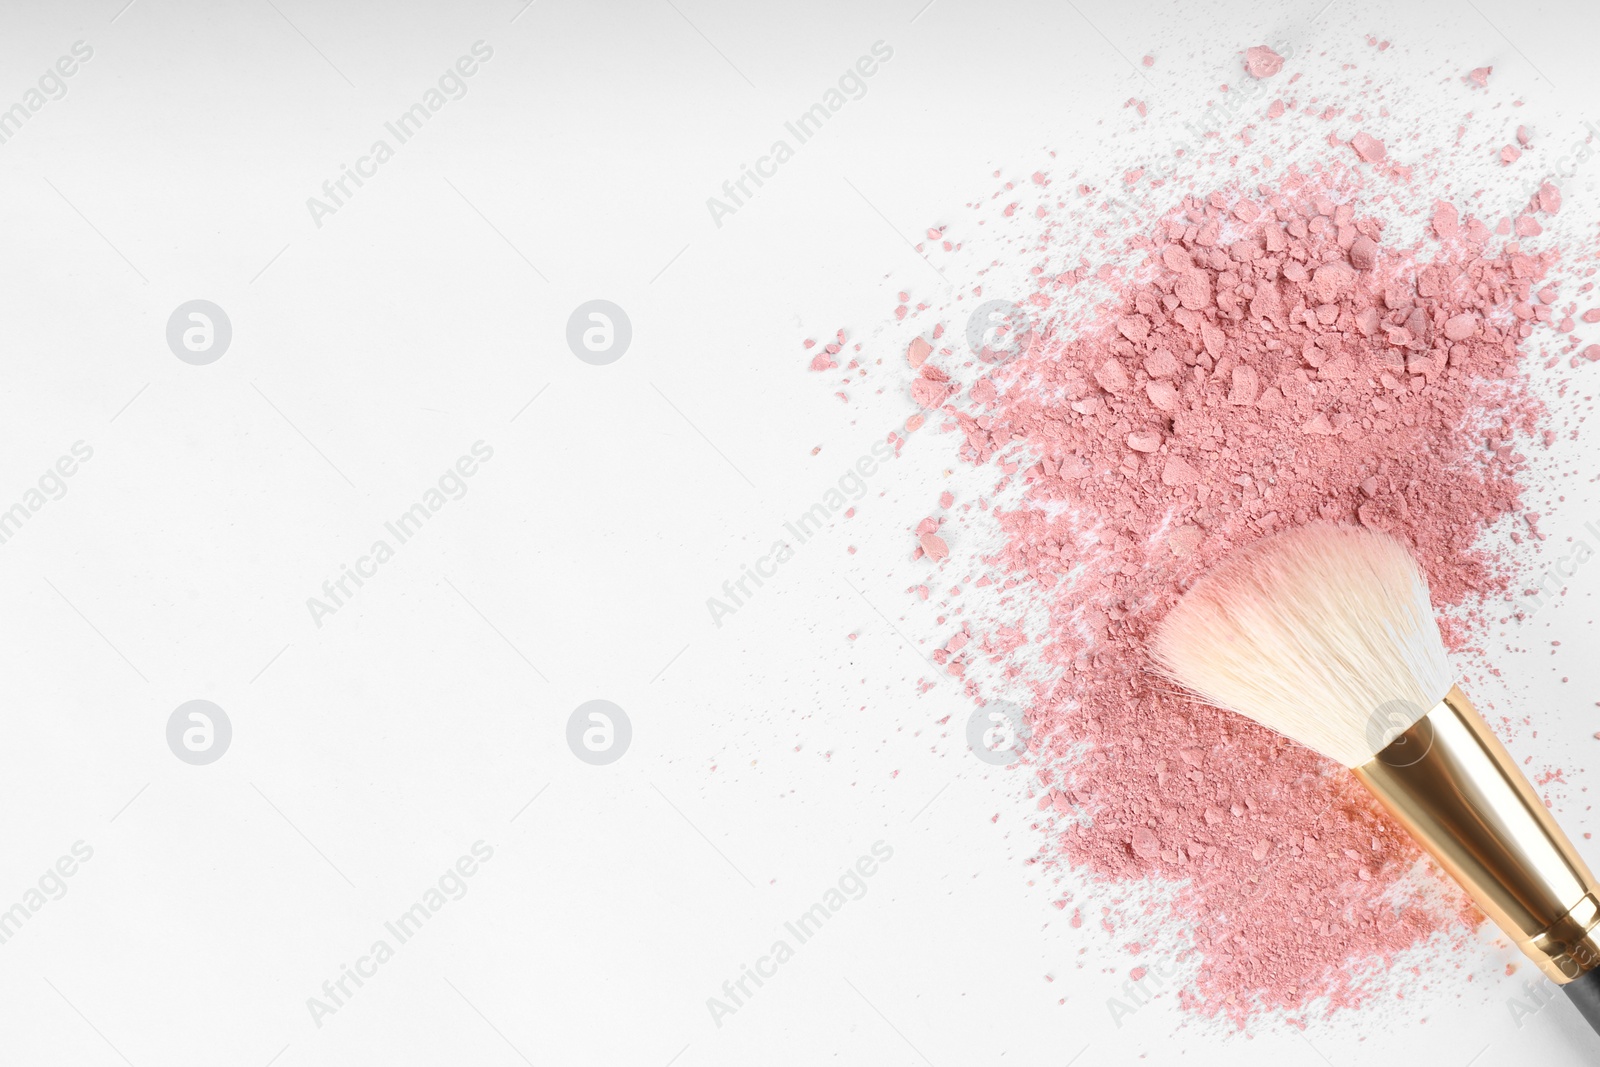 Photo of Makeup brush and scattered blush on white background, top view. Space for text